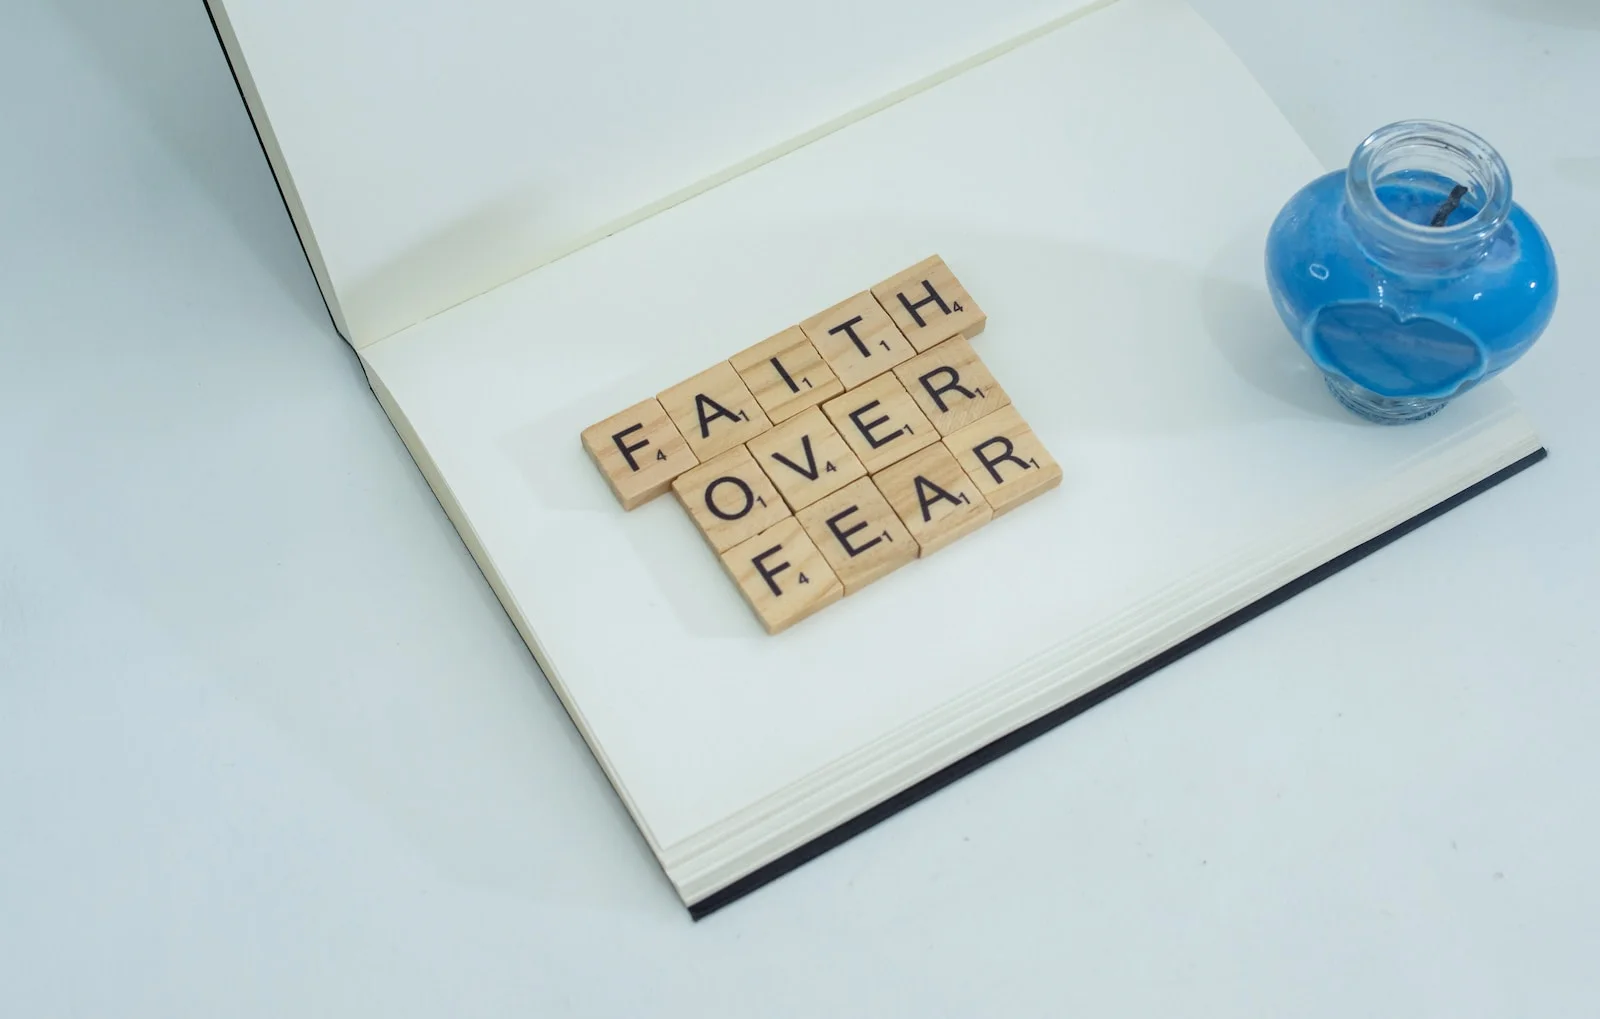 a scrabble of letters spelling faith over fear